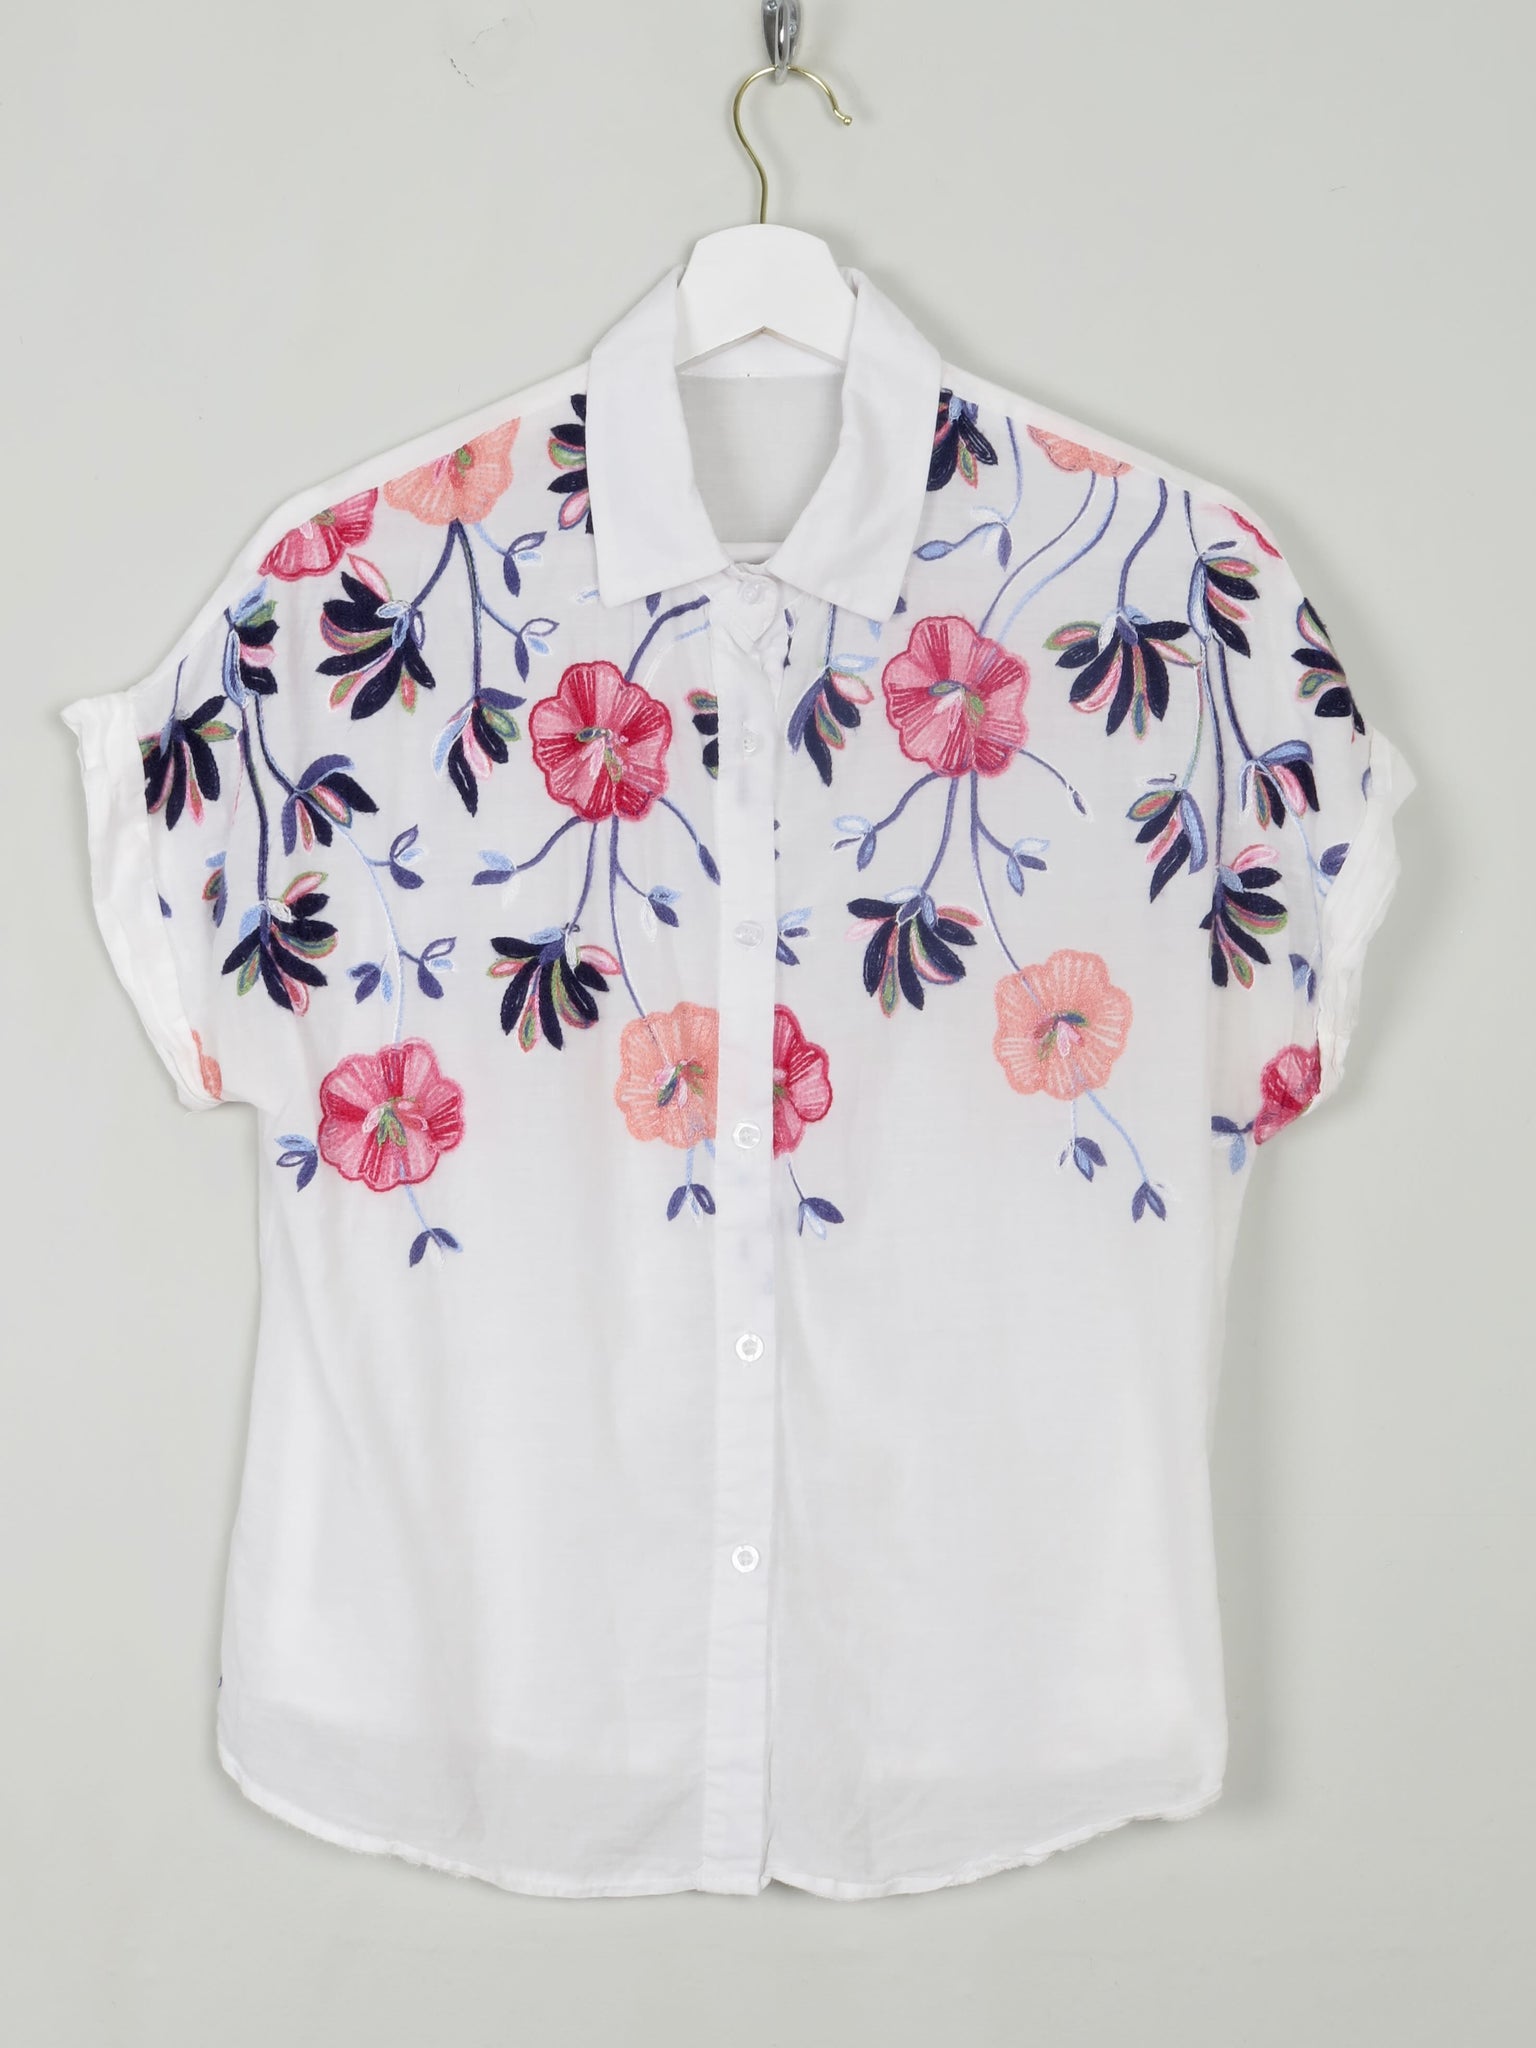 Woemn's Vintage White Blouse With Embroidered Flowers S/M